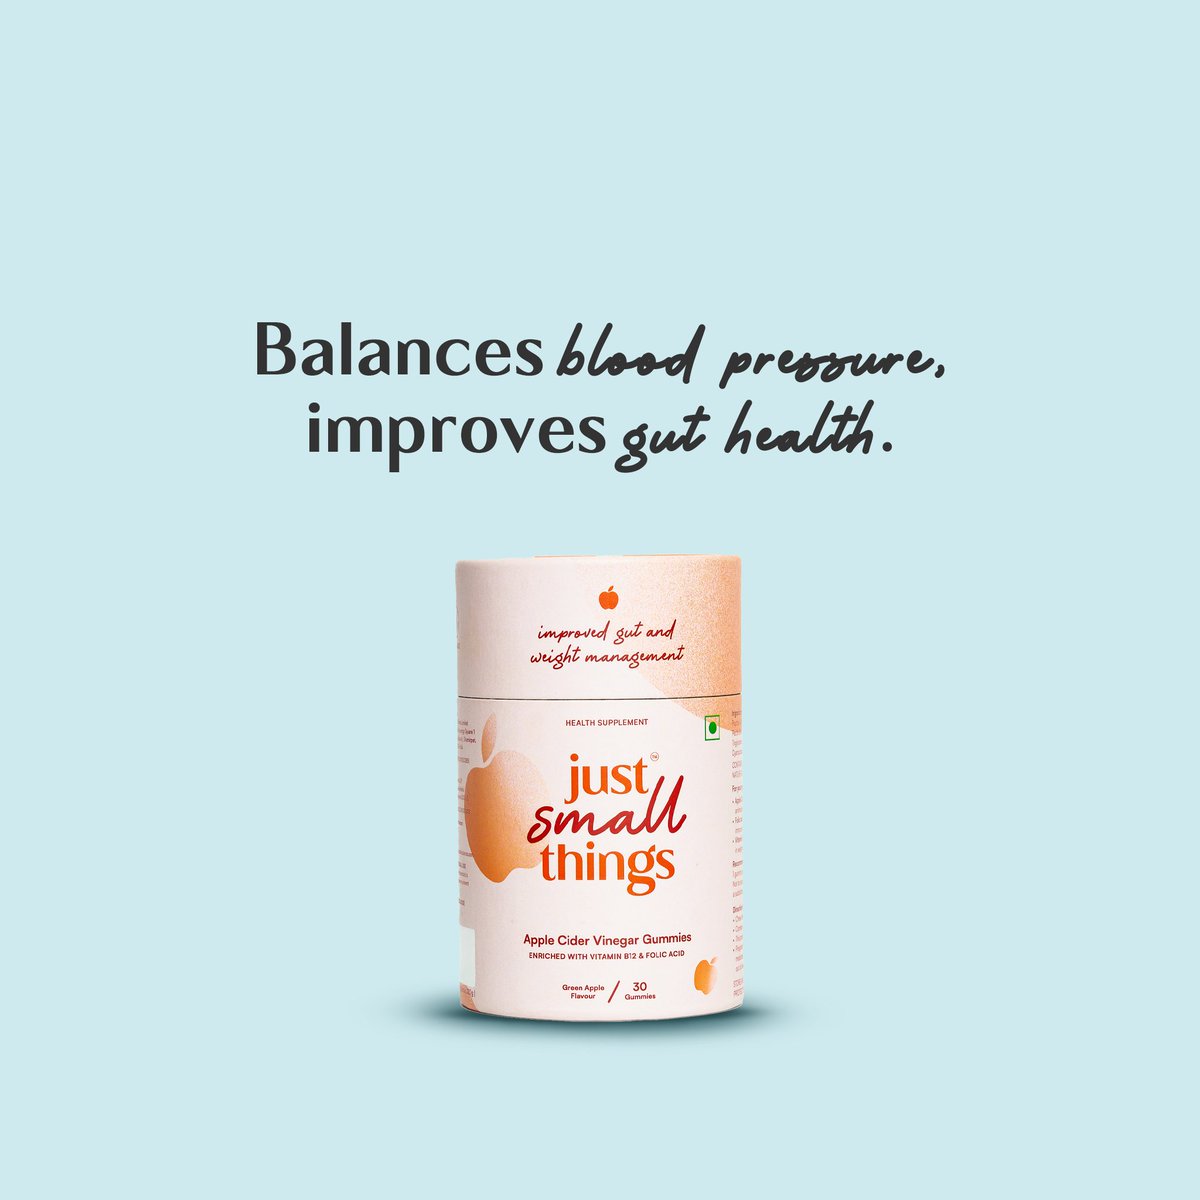 You can take care of your work, our Apple Cider Vinegar gummies will take care of you!

#JST #JustSmallThings #gummies #healthy #smallsteps #MakeABigChange #applecidervinegar #linkinbio